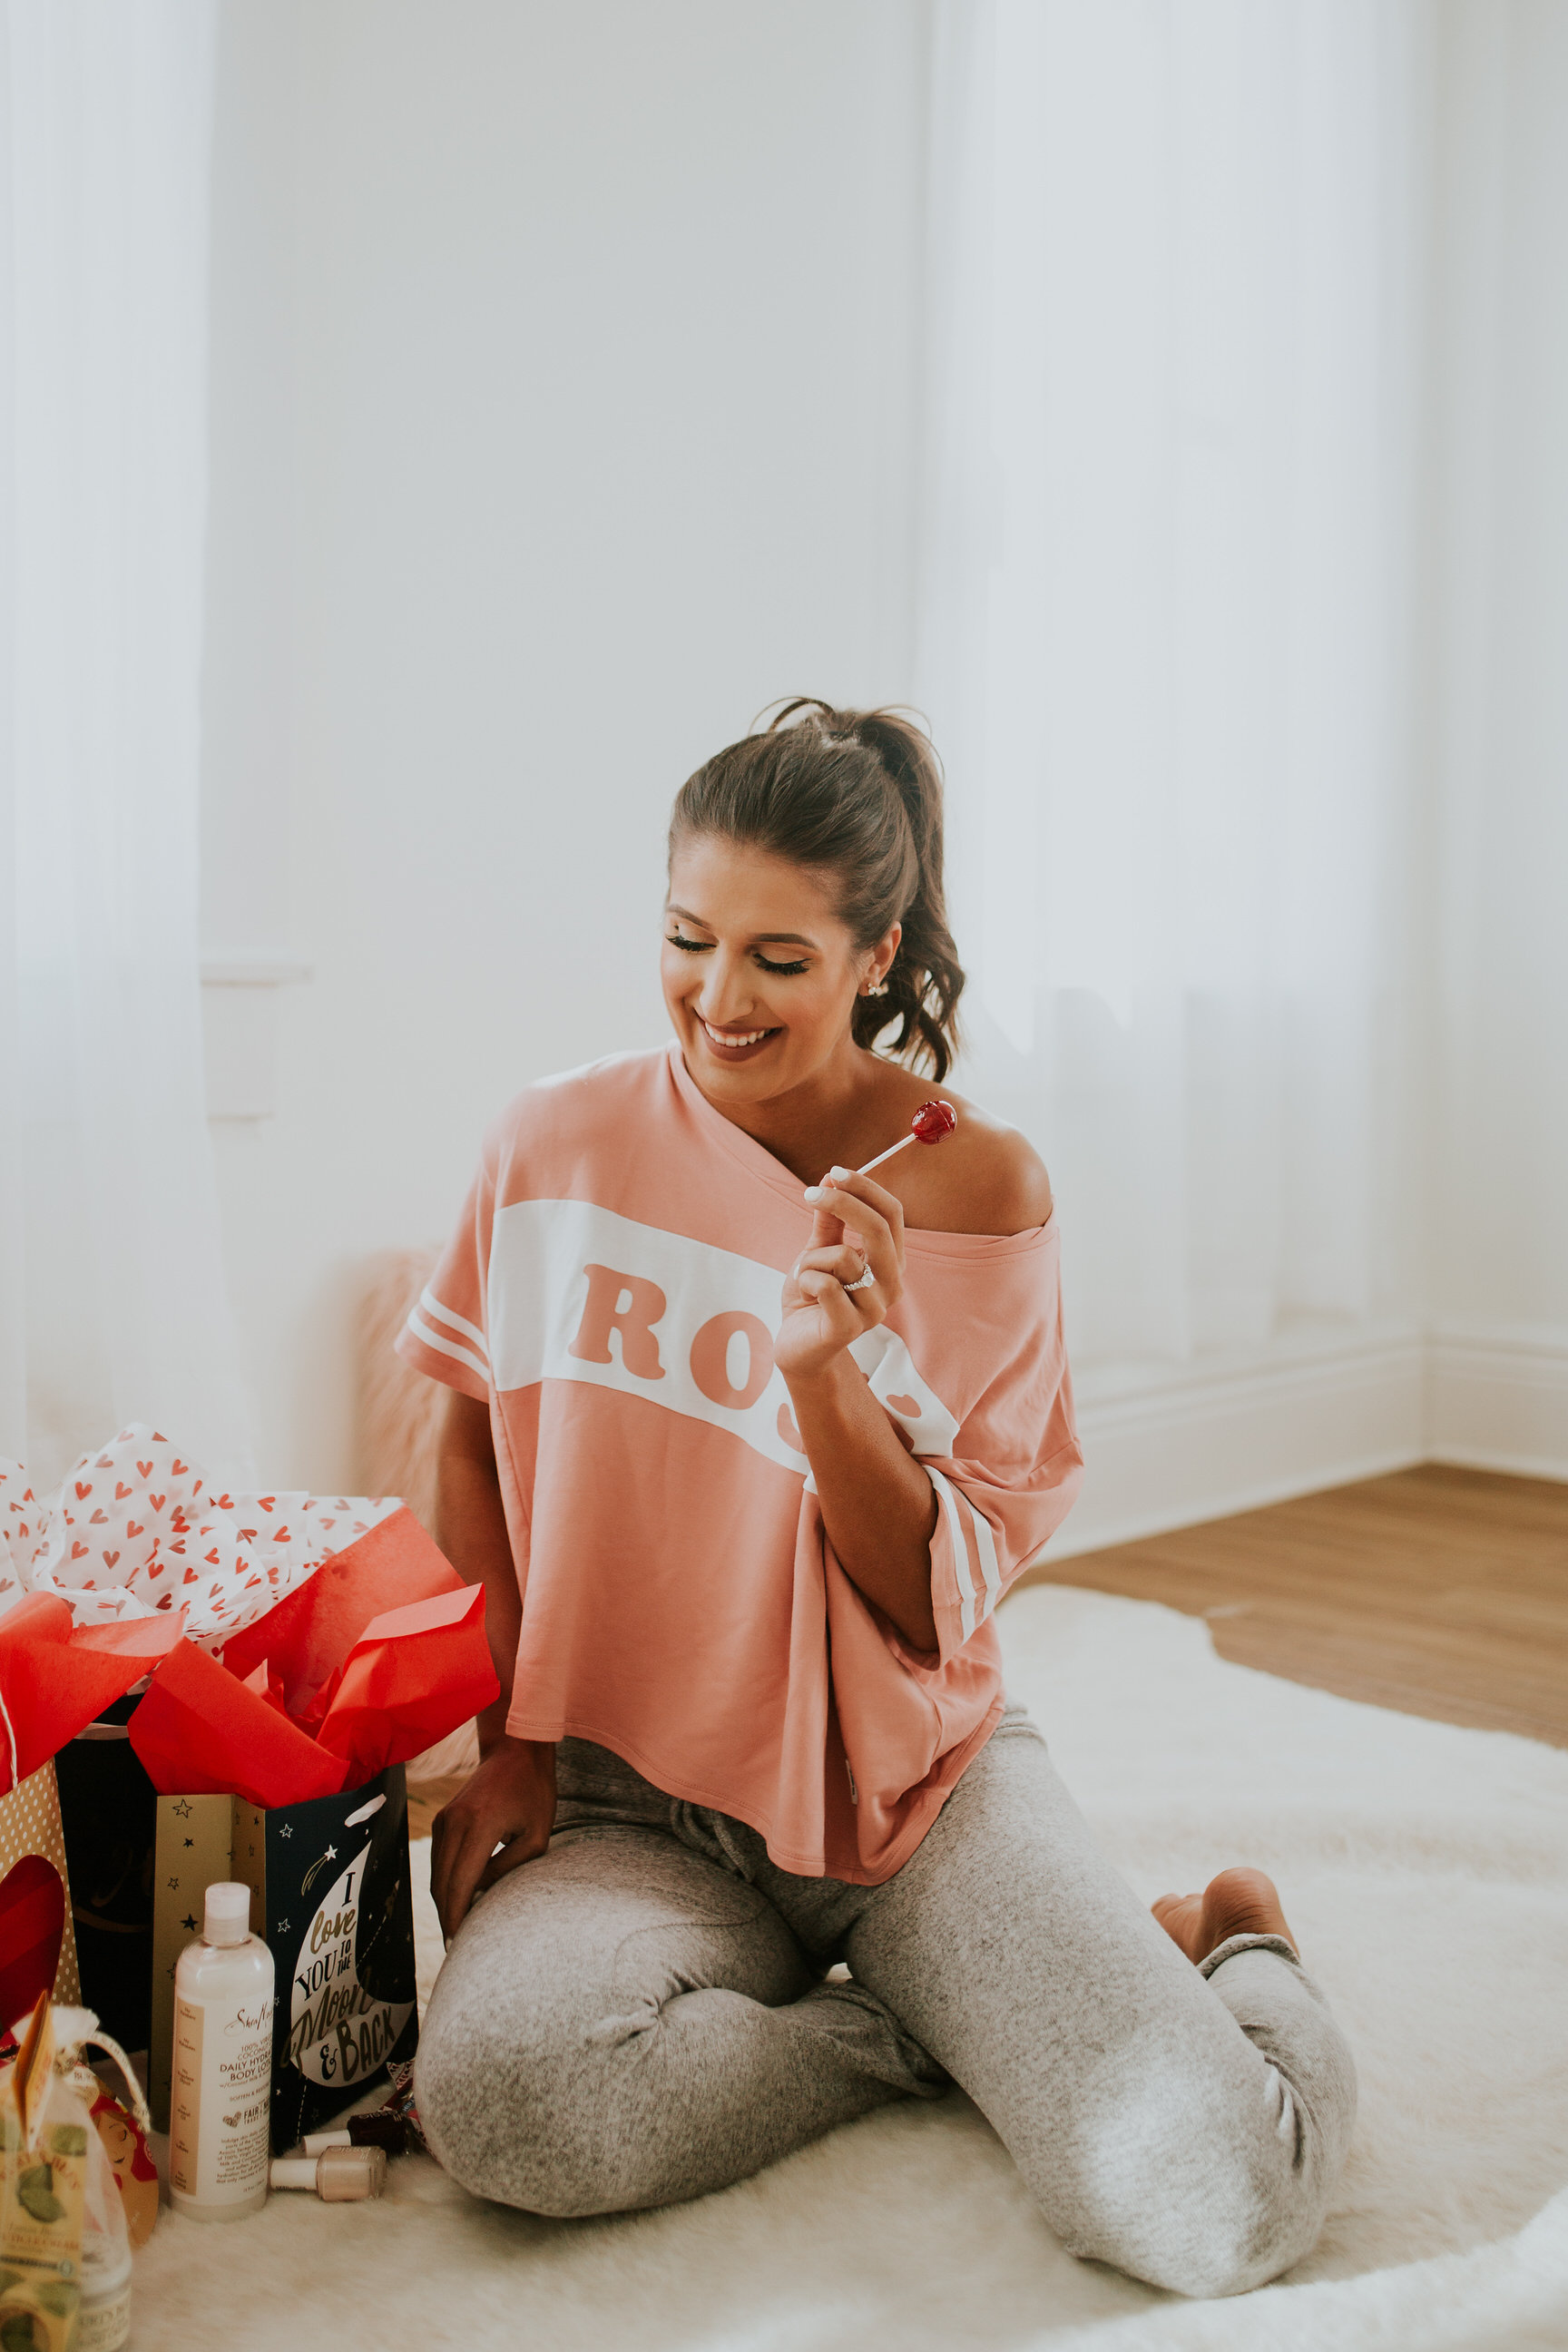 galentine's day gifts, walmart gift guide, walmart valentine's day, galentine's day, galentine's gifts, galentine's gift guide, valentine's day gift guide // grace wainwright a southern drawl